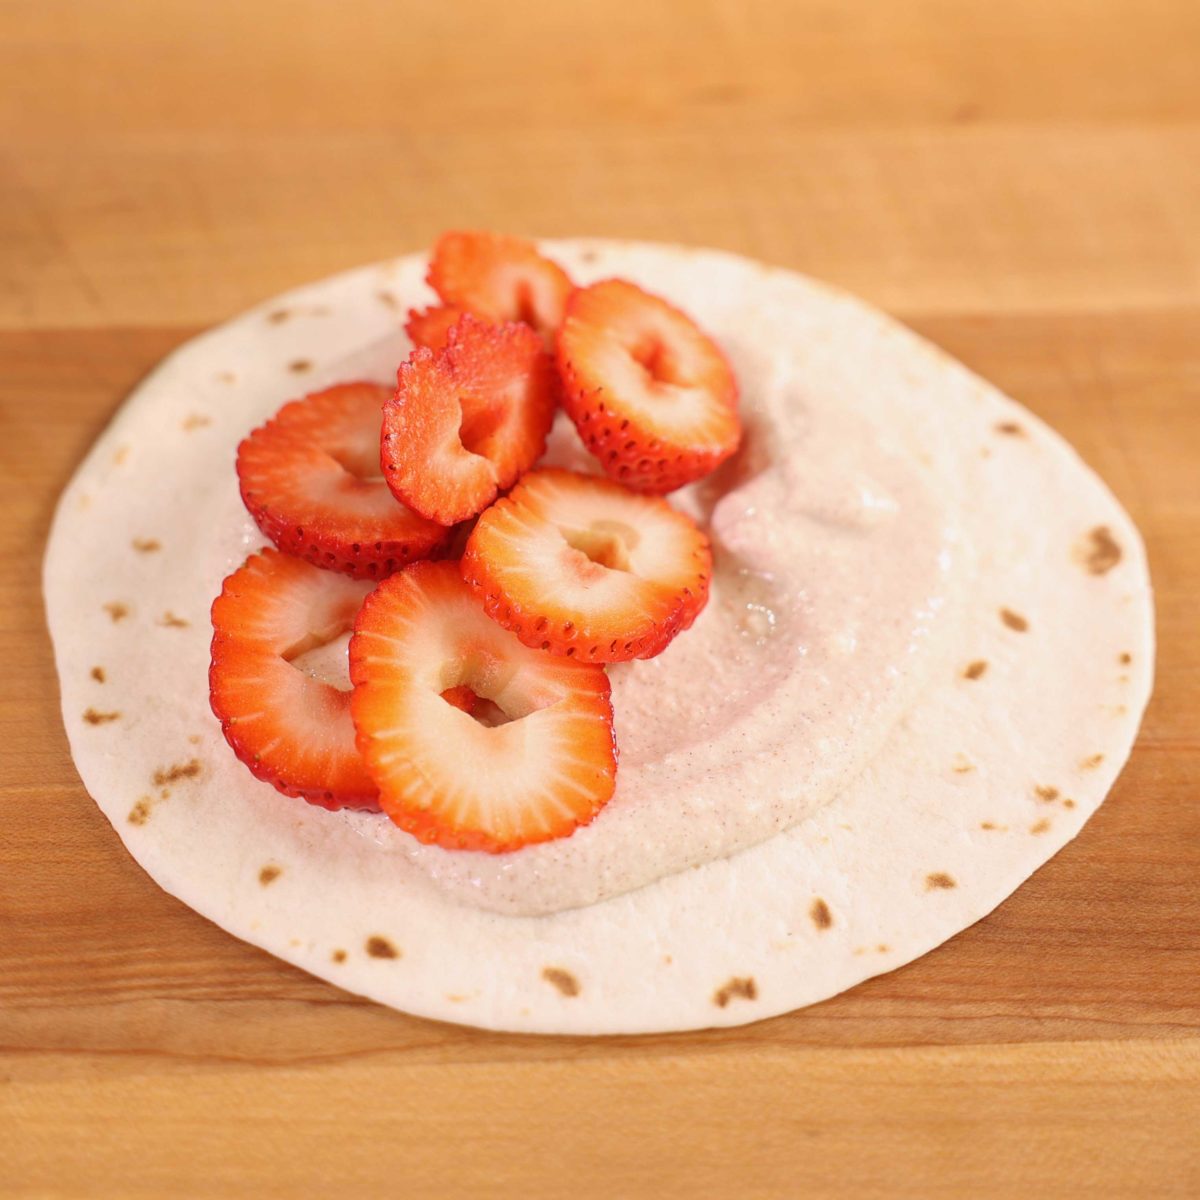 slices of strawberries on a tortilla